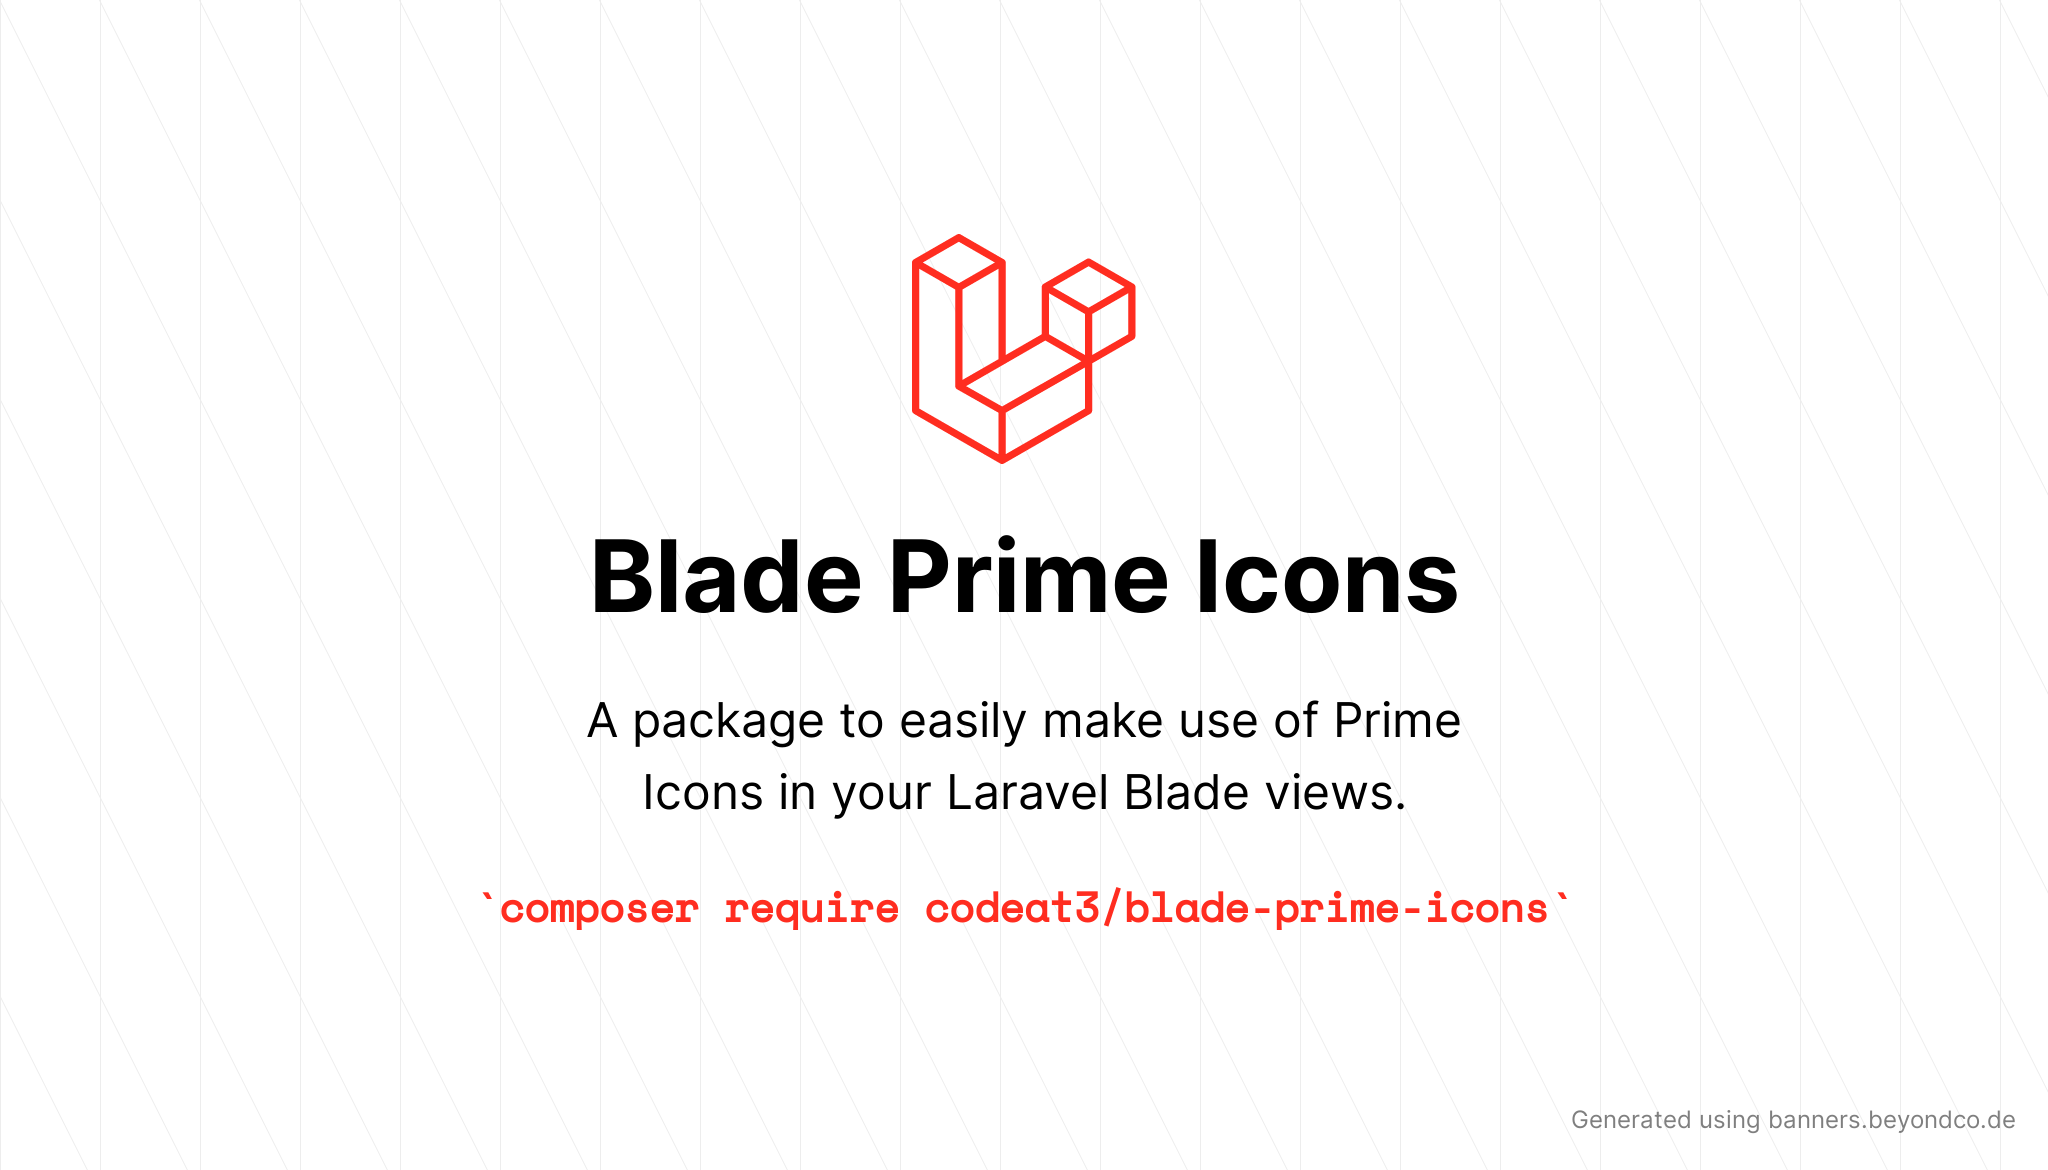 socialcard-blade-prime-icons.png